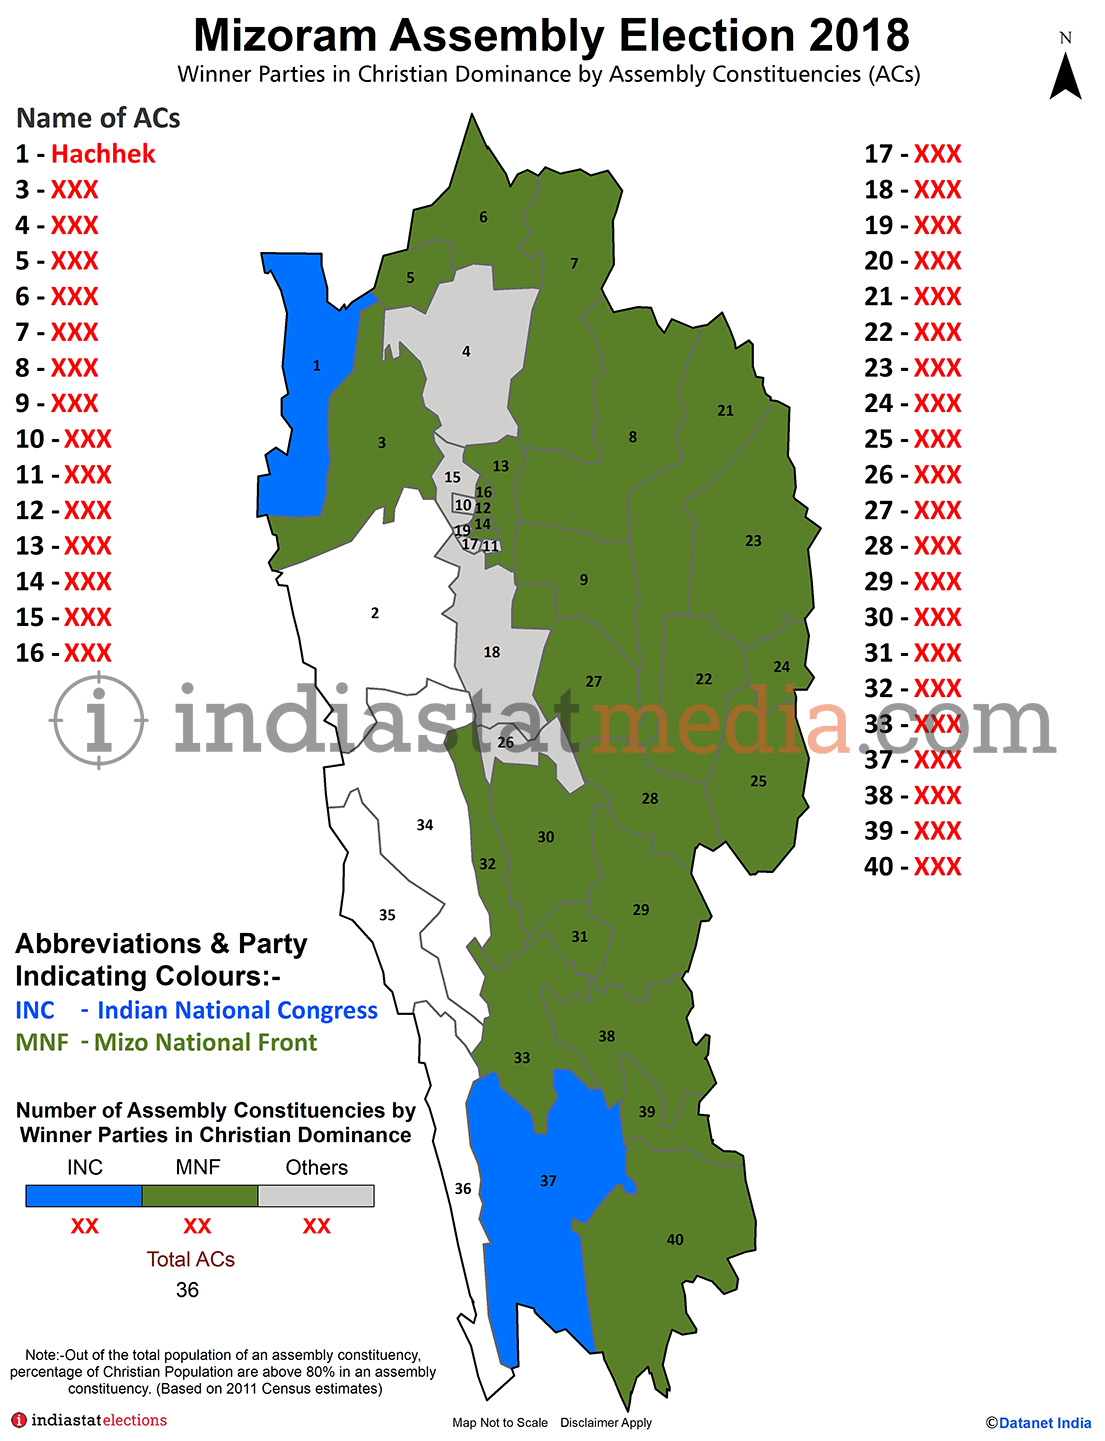 Winner Parties in Christian Dominance Constituencies in Mizoram Assembly Election (2018)